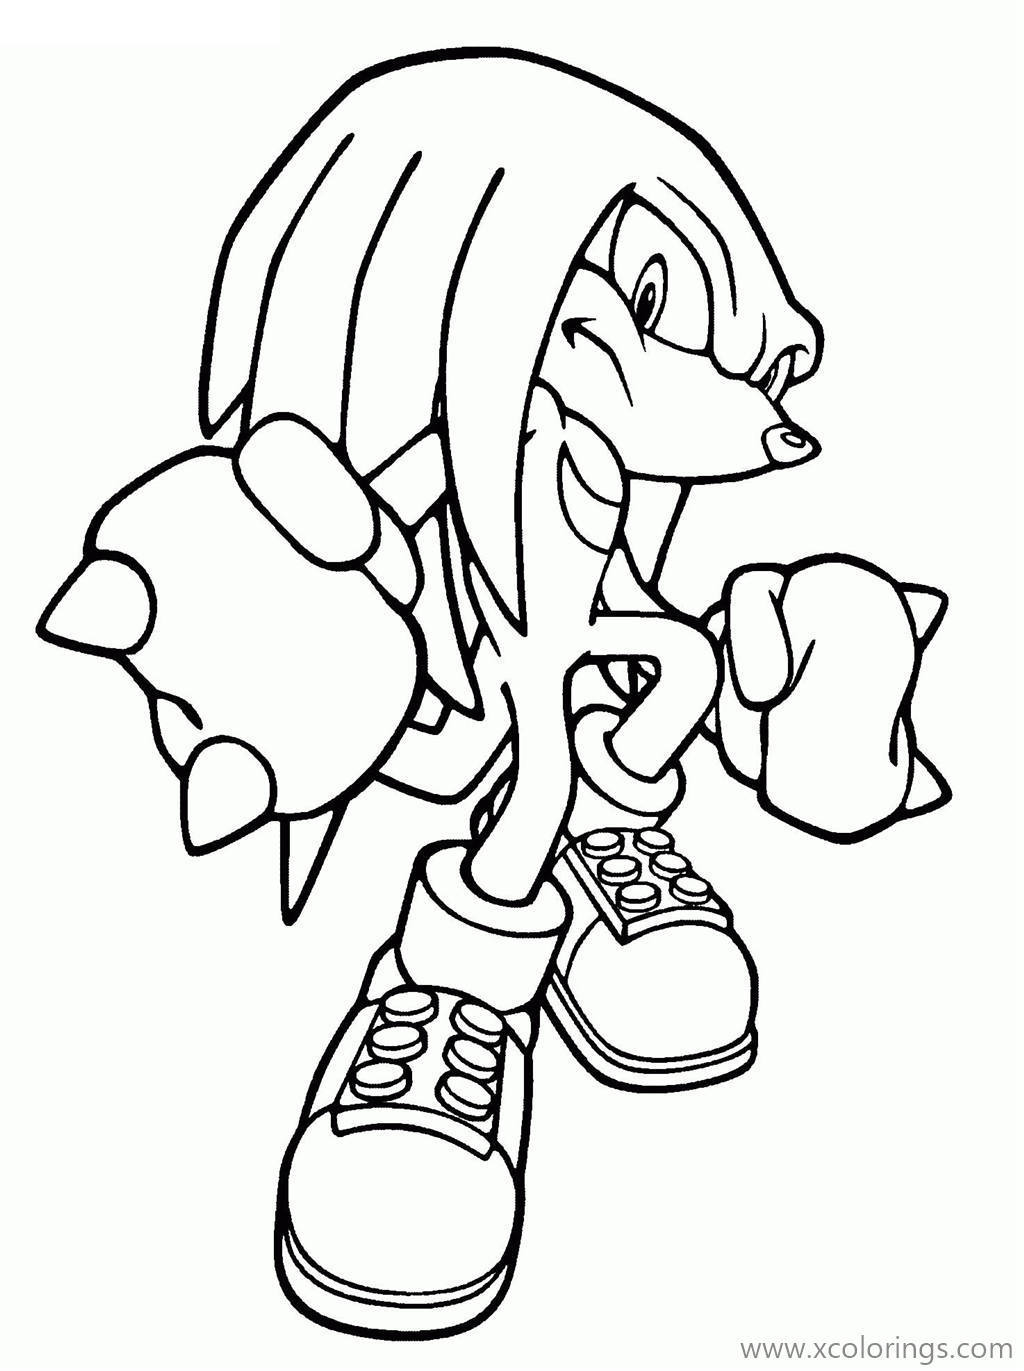 Free Knuckles from Sonic The Hedgehog Coloring Page printable